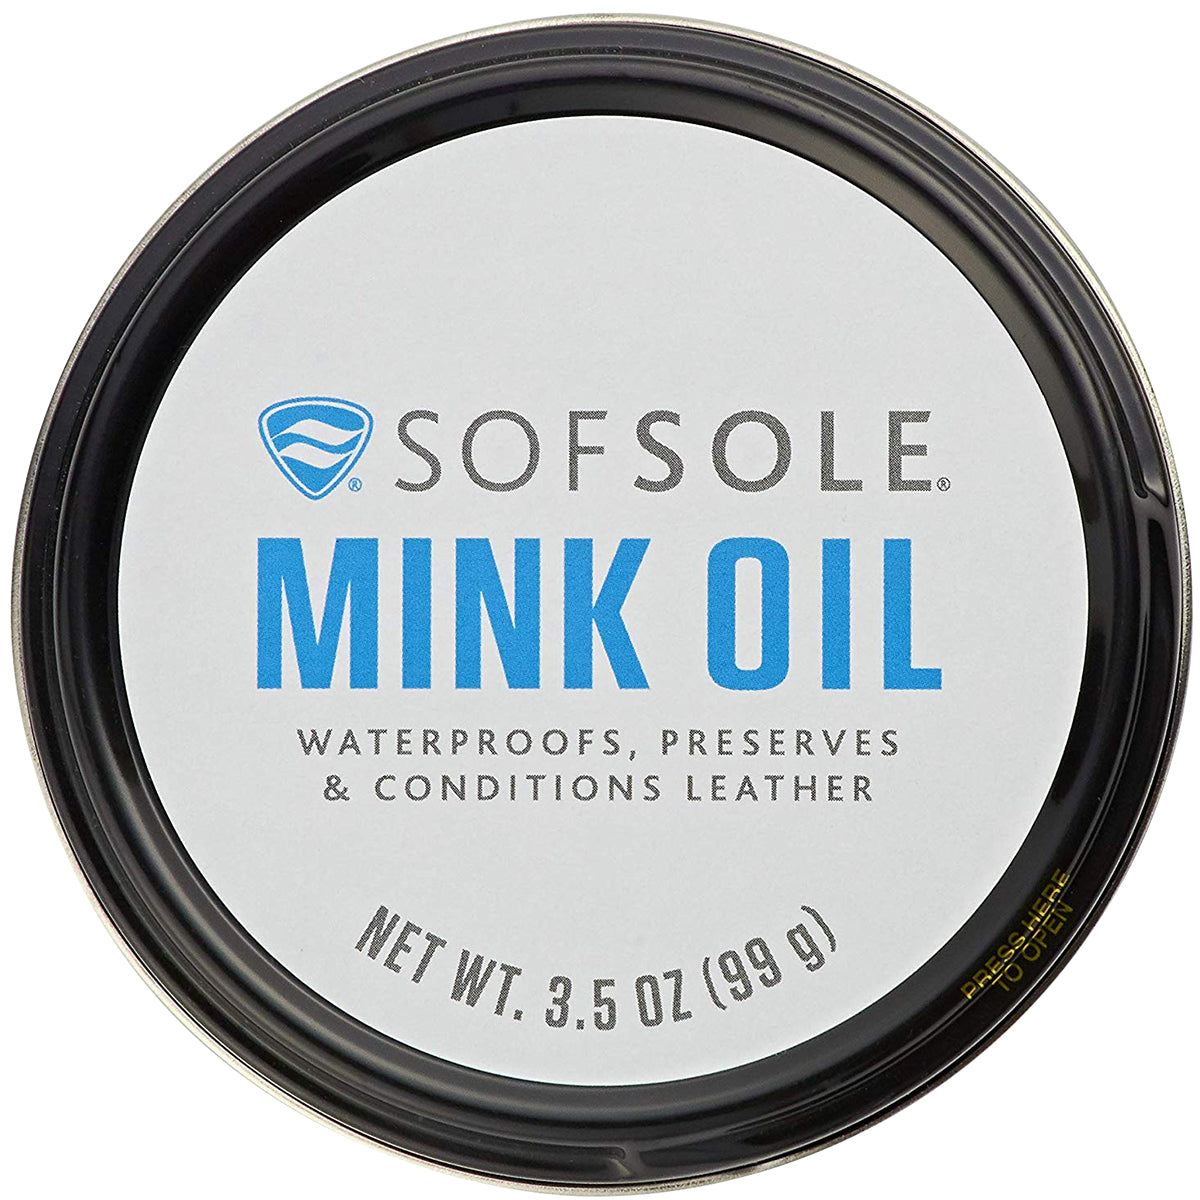 Sof Sole 3.5 oz. Leather Protecting Mink Oil SofSole